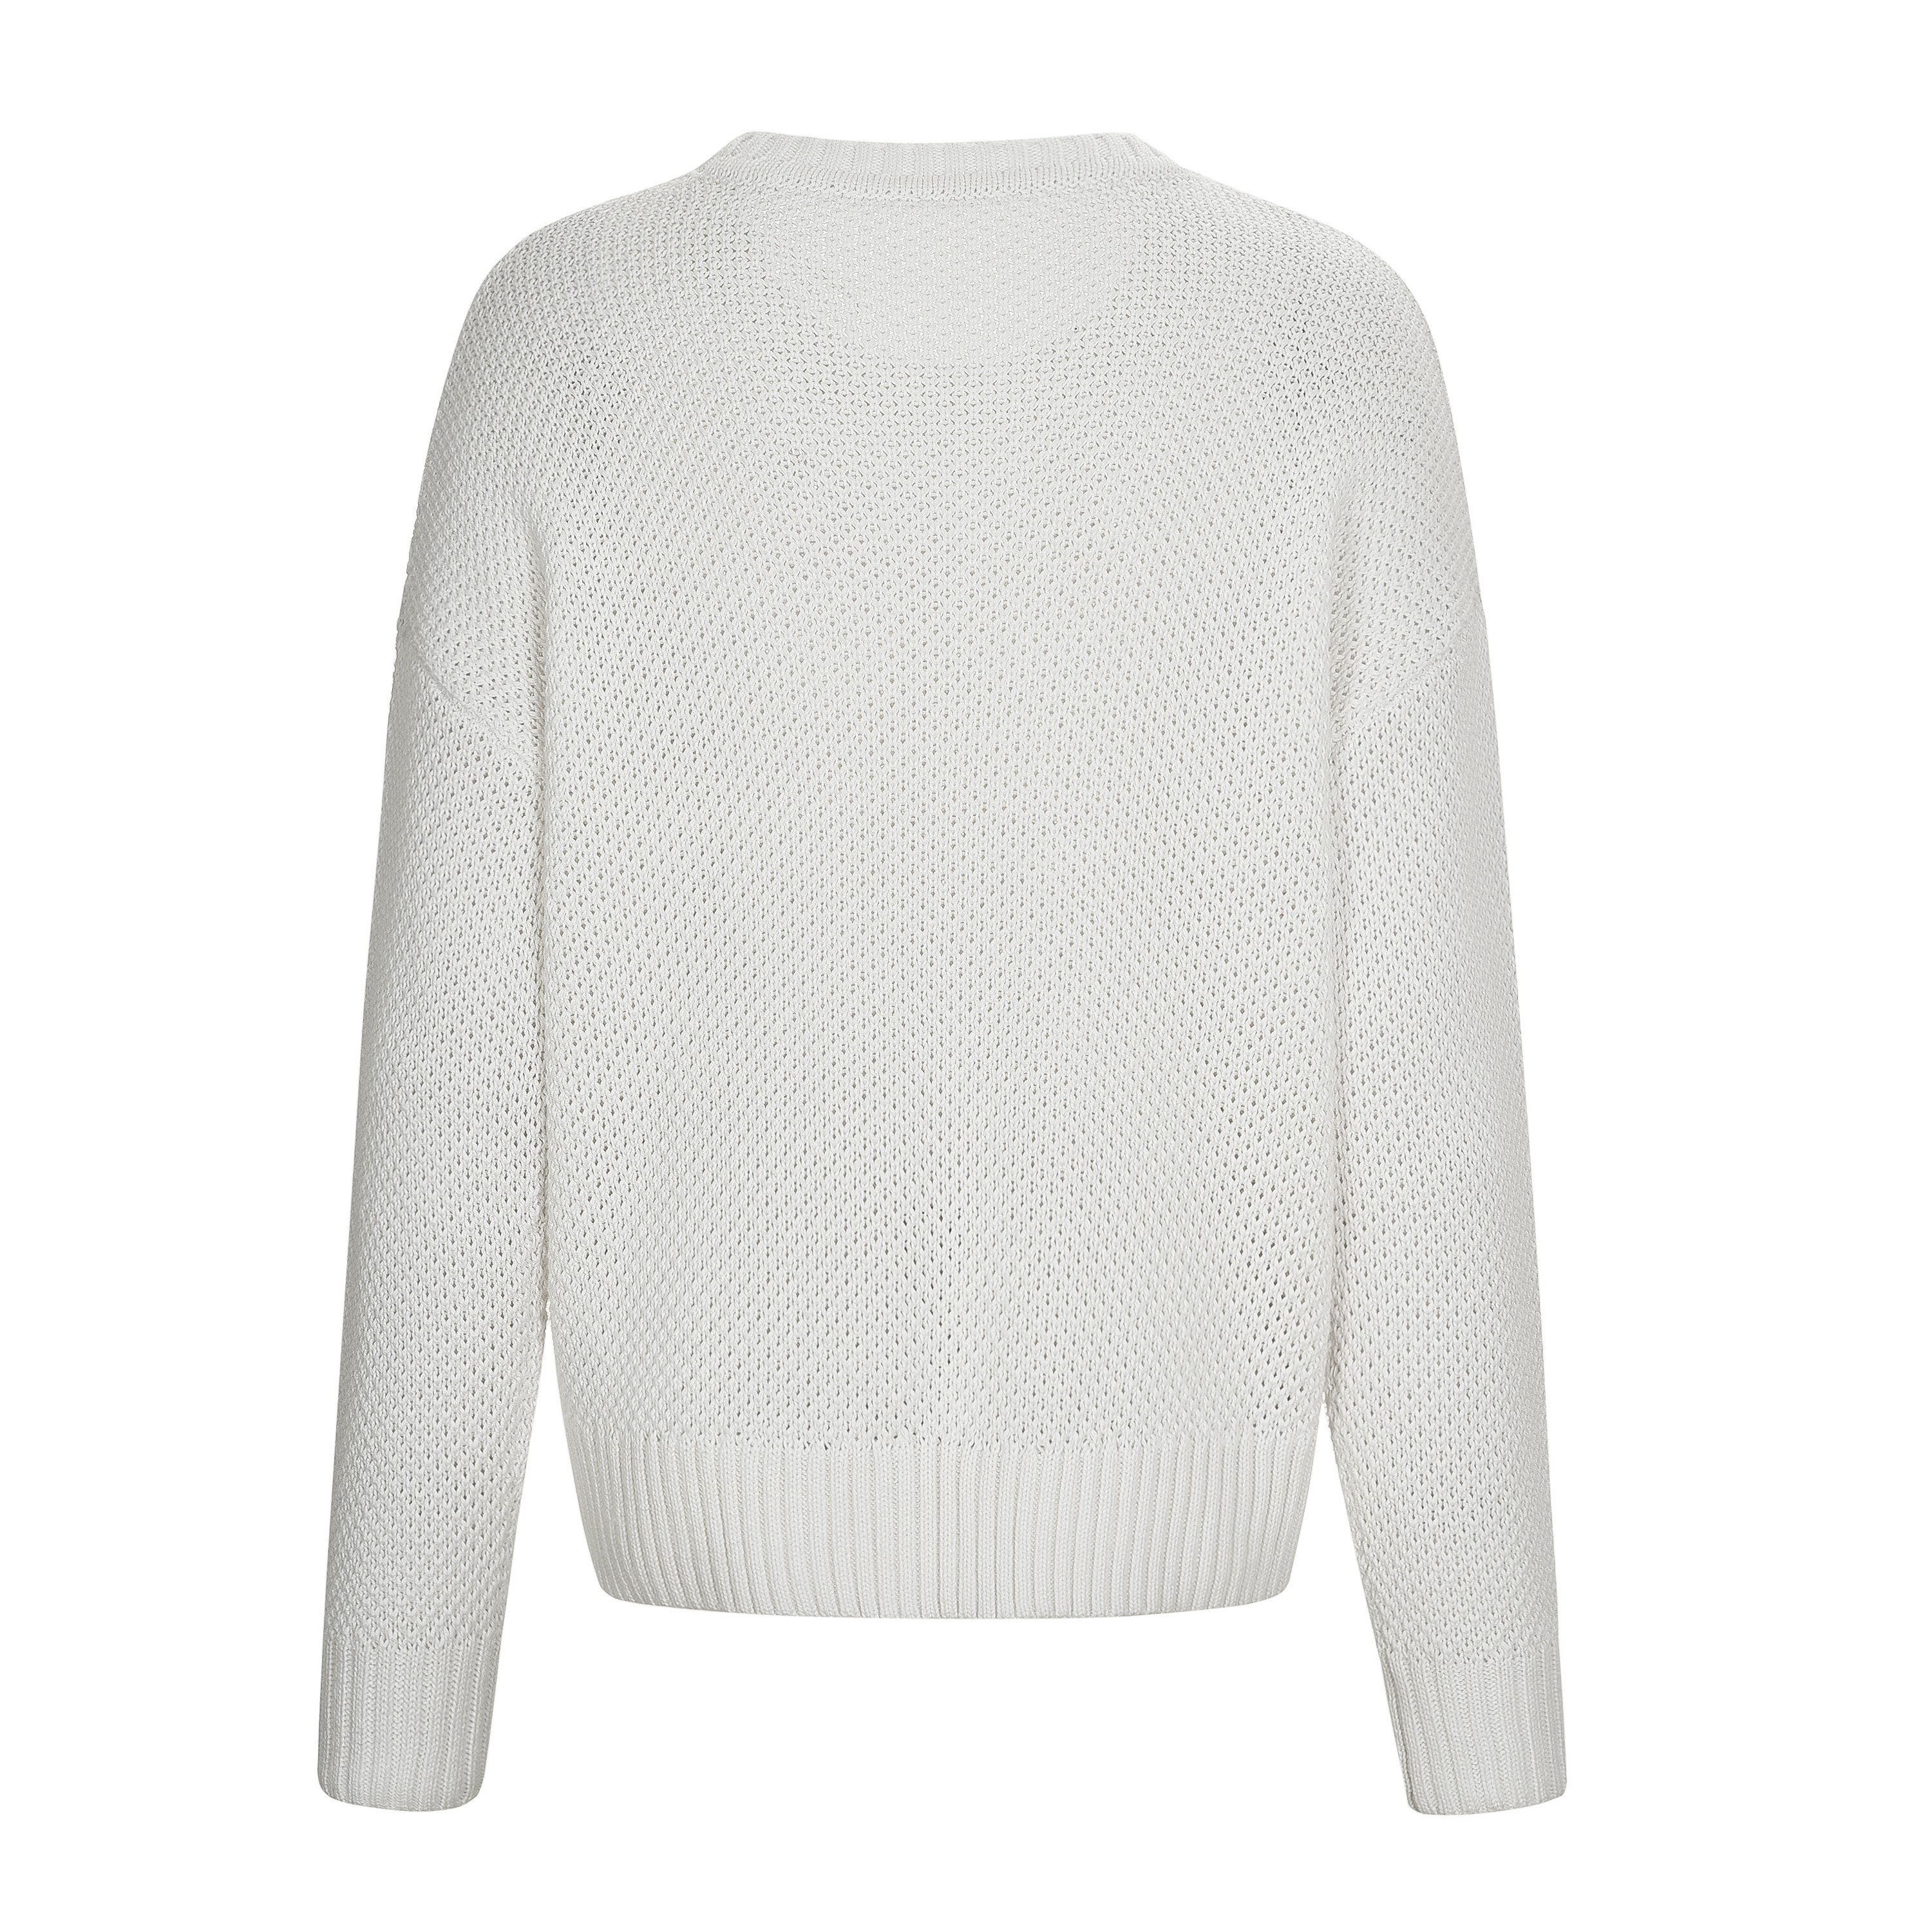 Women&#x27;s Long Sleeve Crewneck Solid Comfy Knit Tops Pullover Mesh hollow white cashmere ladies sweater Ropa de mujer